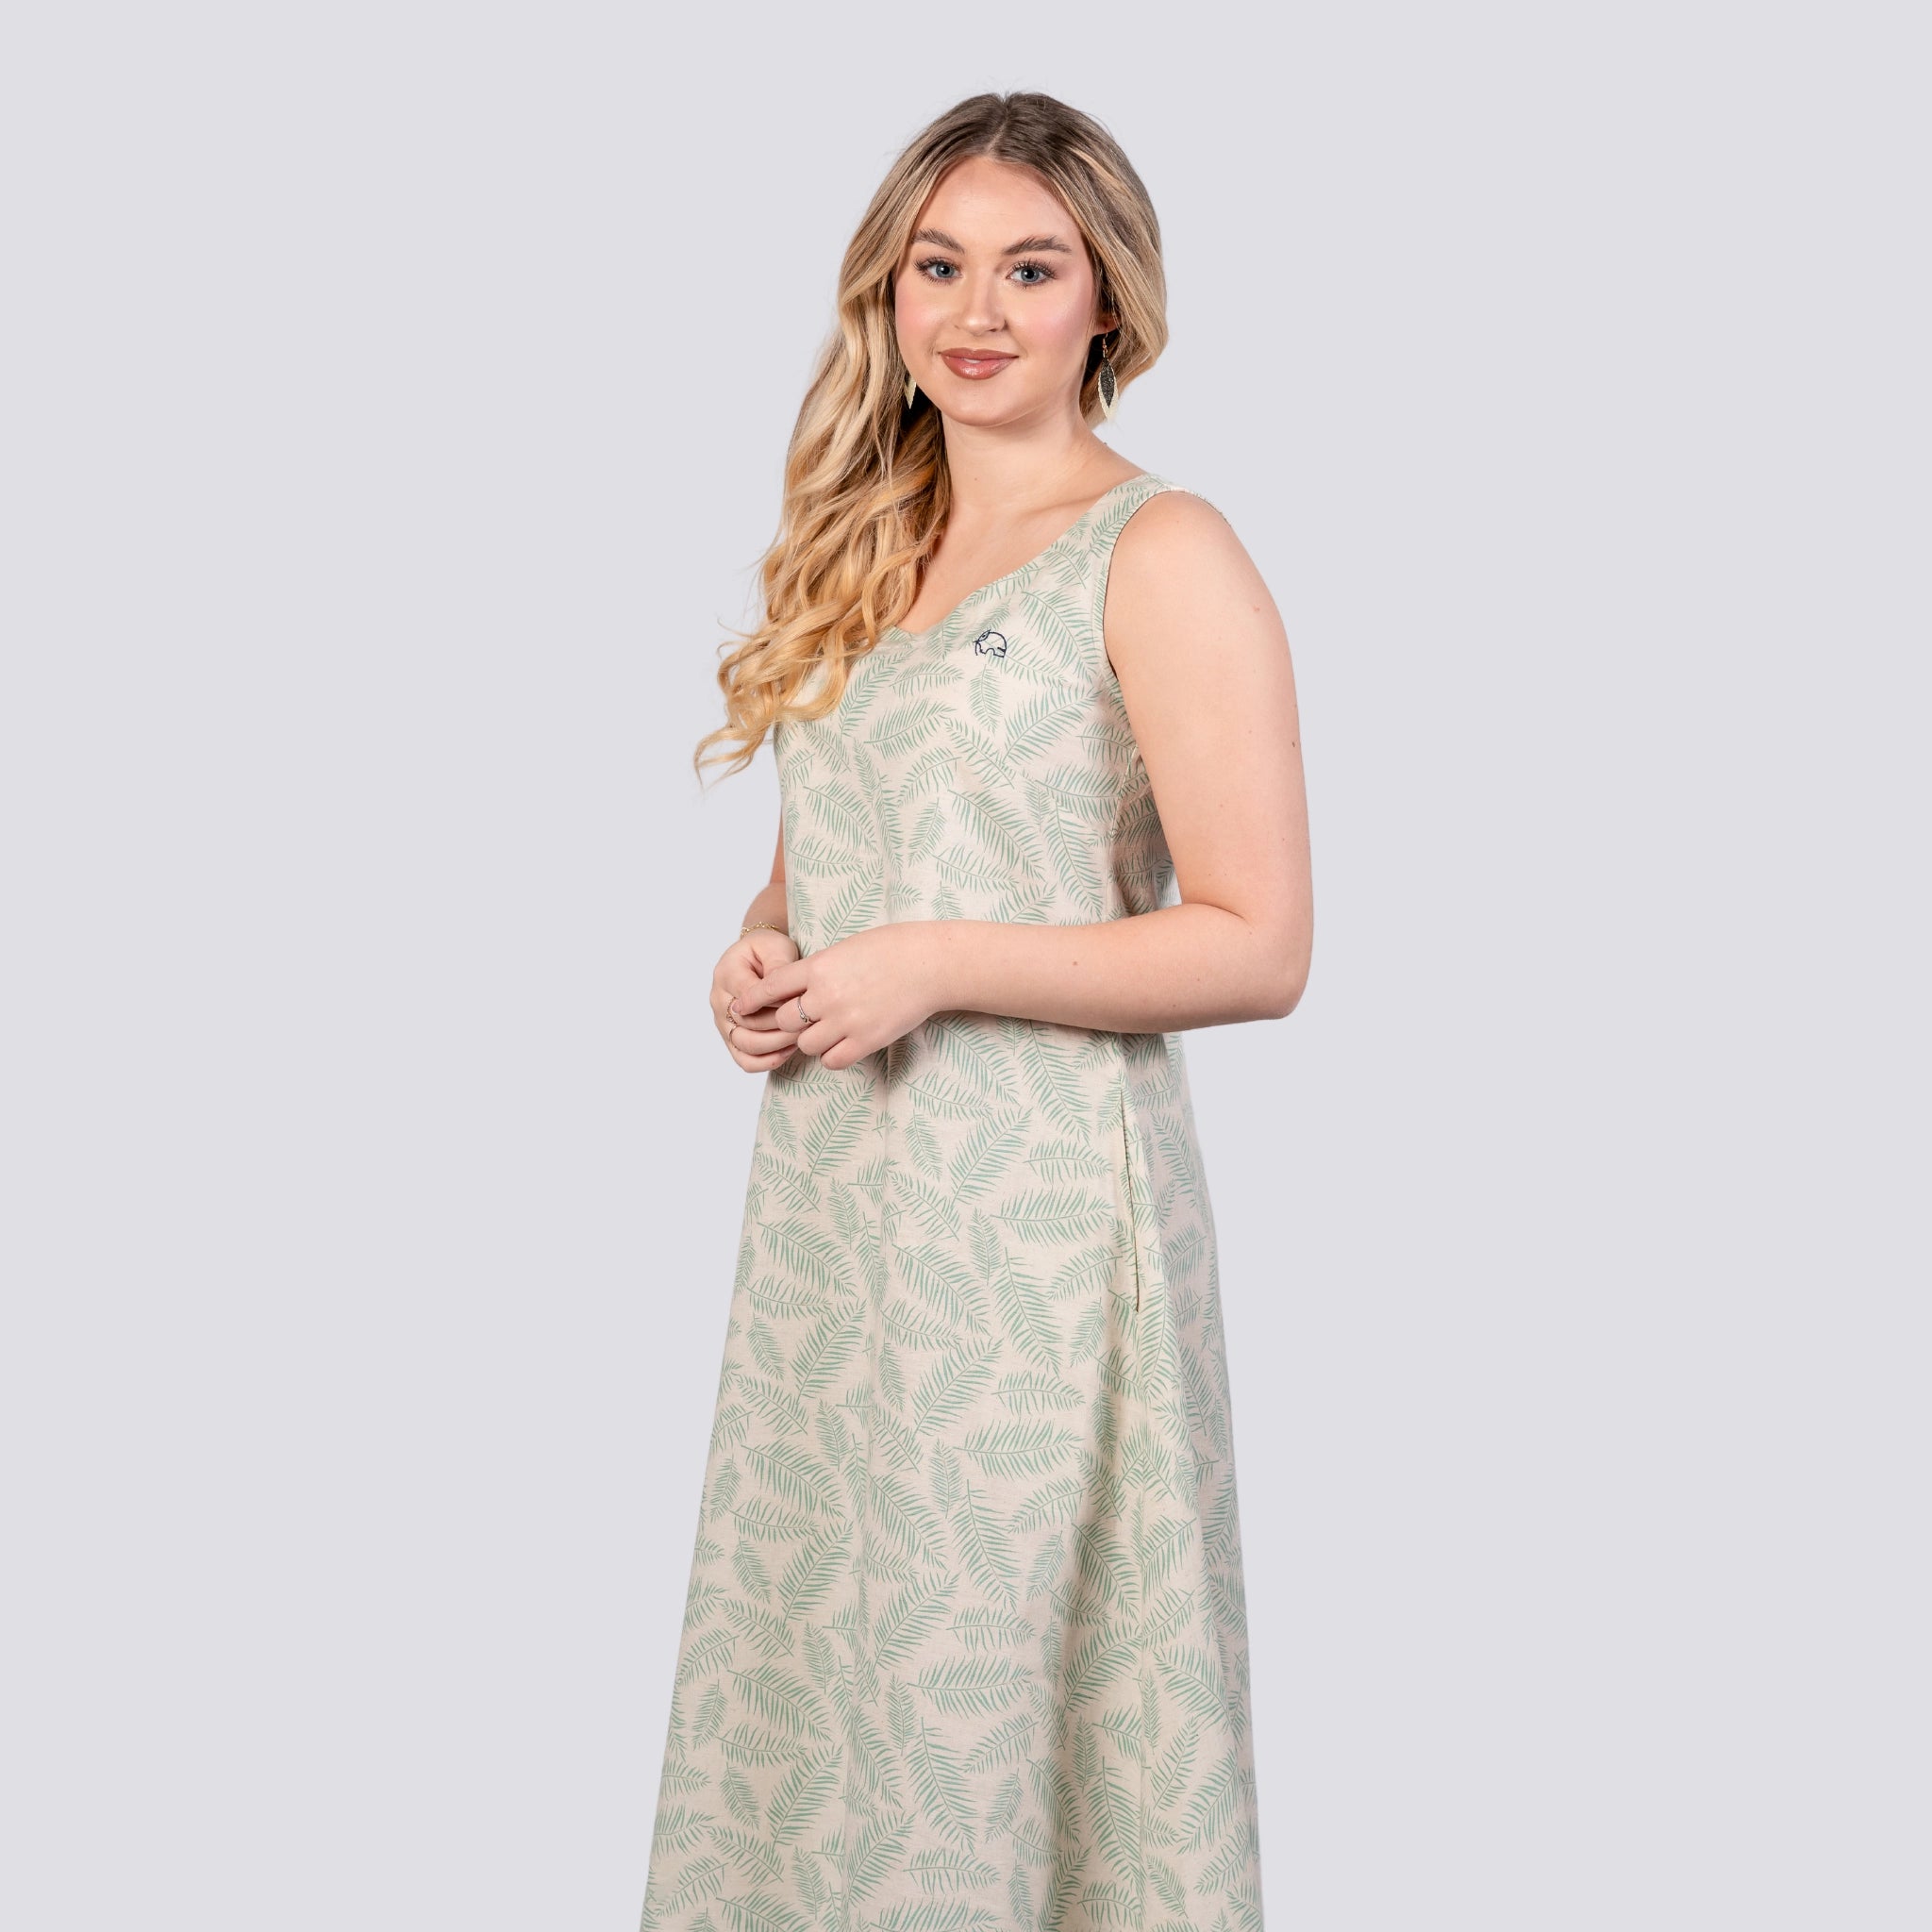 A young woman with long blonde hair, wearing a sleeveless U-neck Karee Mystic Breeze High Low Linen Cotton Midi Dress with a leaf pattern, stands against a grey background, smiling slightly.